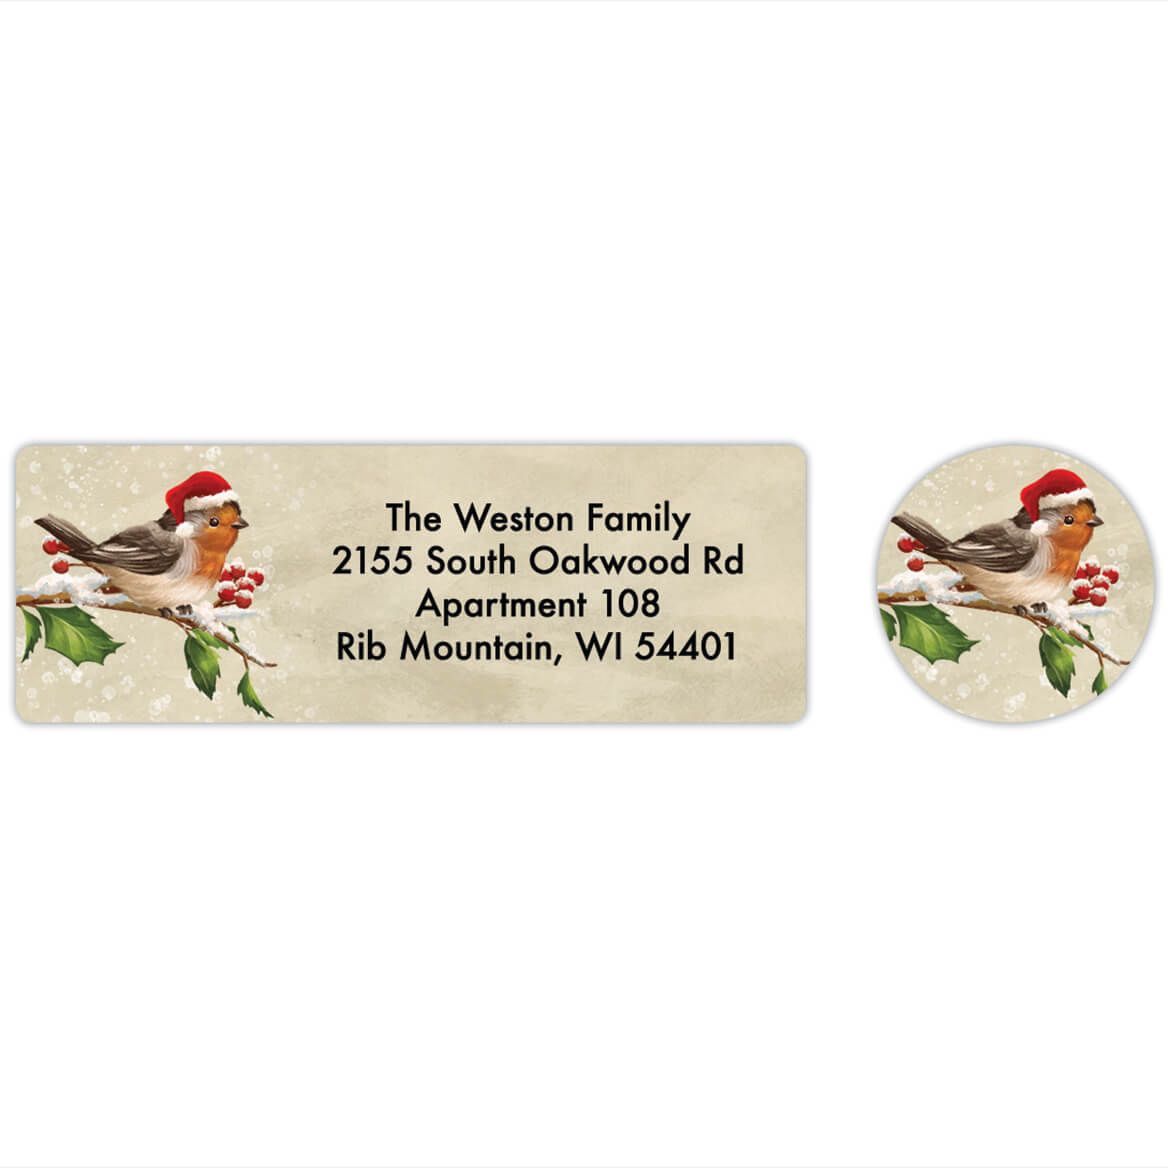 Personalized Birds with Hats Labels & Envelope Seals 20 + '-' + 368285